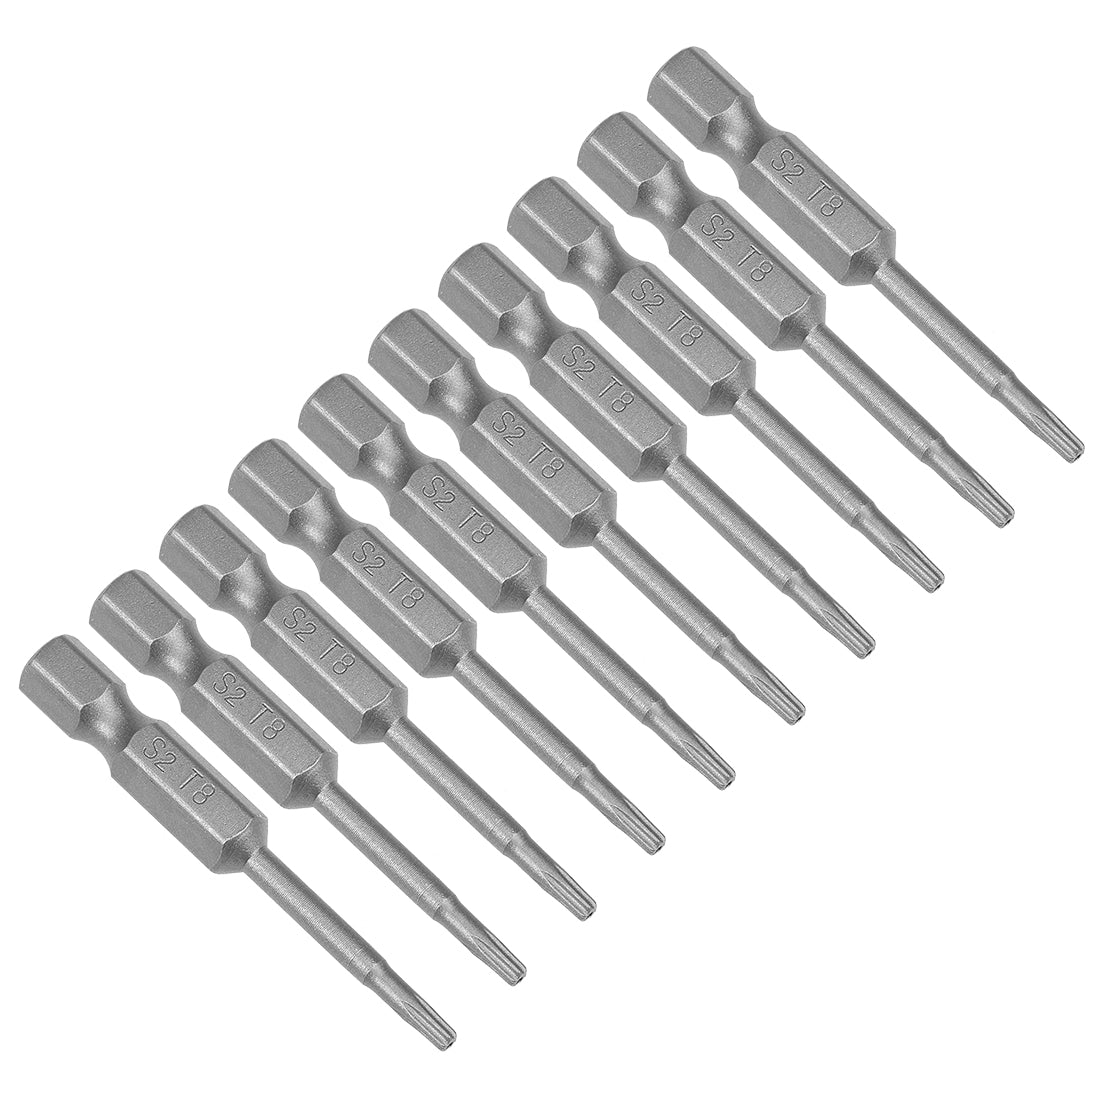 uxcell Uxcell 10pcs 50mm 1/4" Hex Shank T8 Magnetic Torx Head Security Screwdriver Bits S2